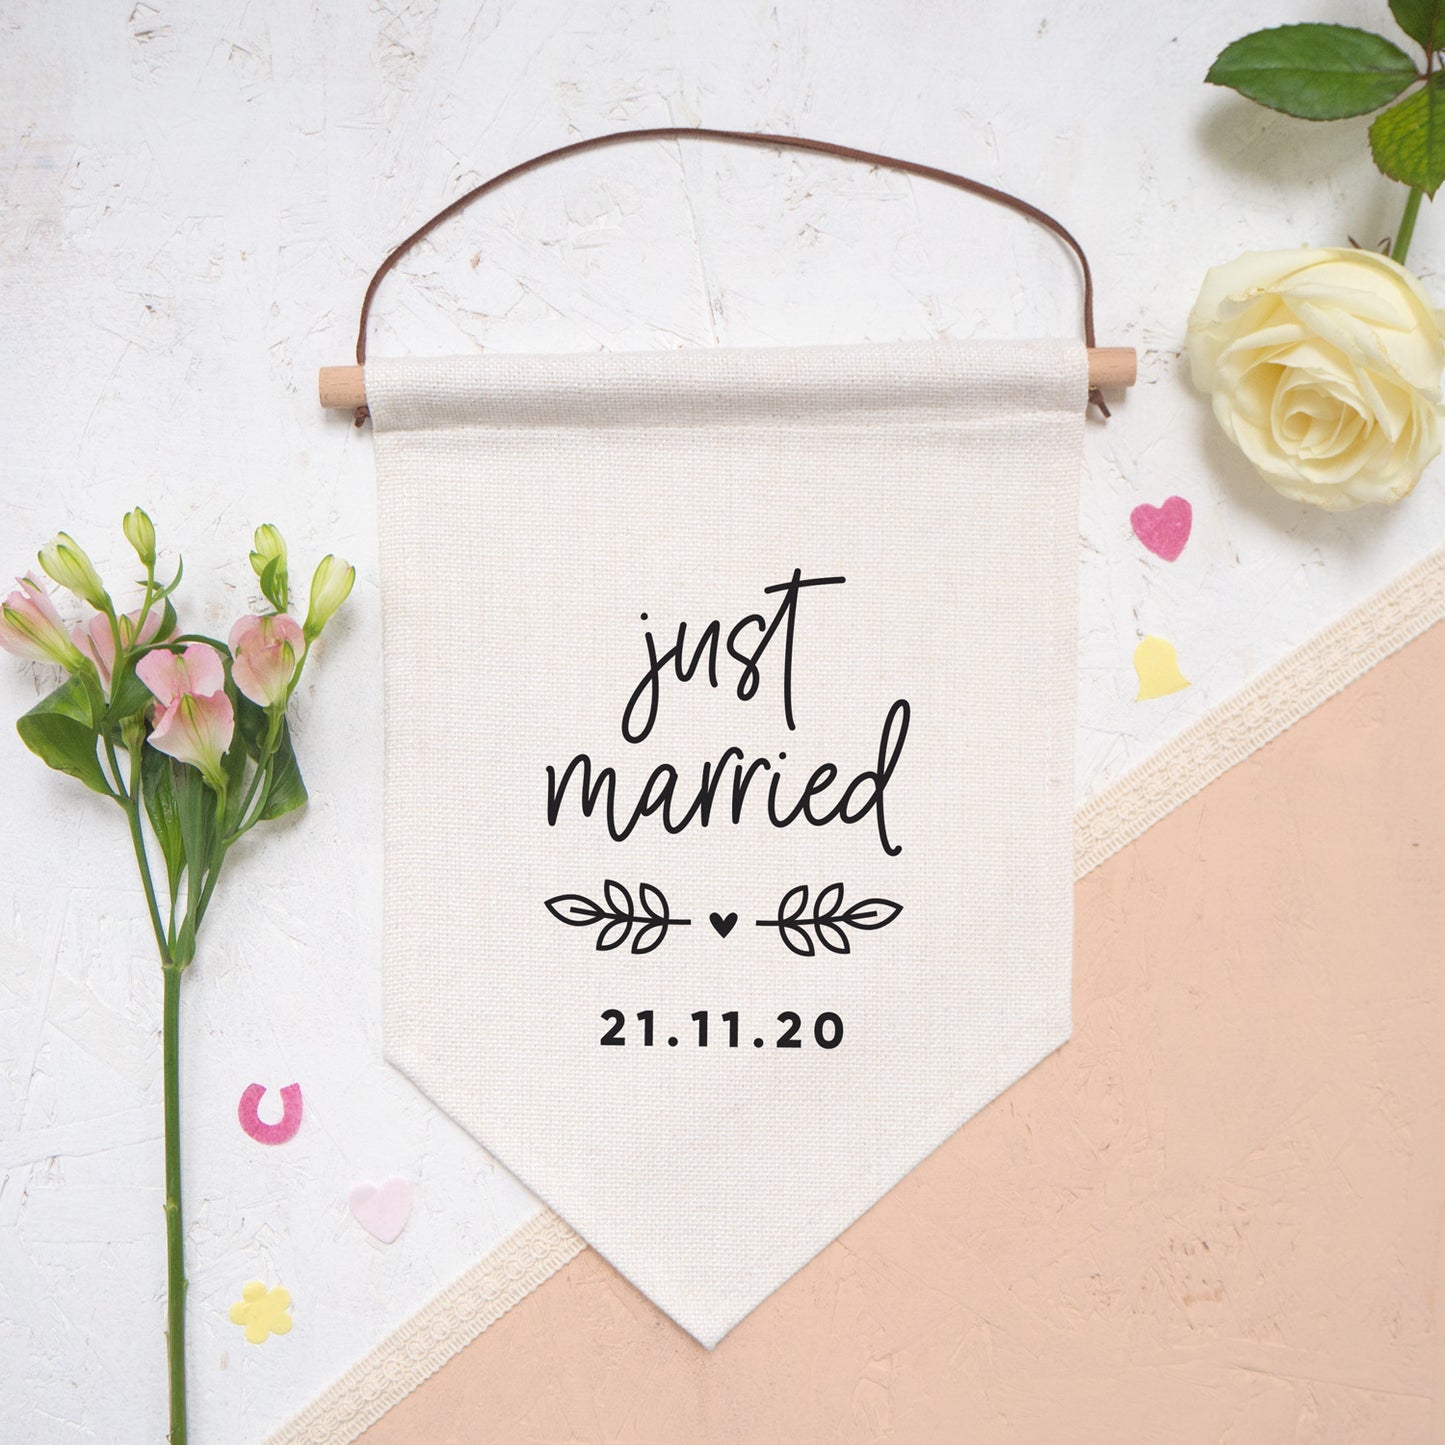 Just married personalised pennant flag with script 'just married', vine and a heart detail and a personalised wedding date. The flag is photographed on a white and peach background with confetti and flowers.